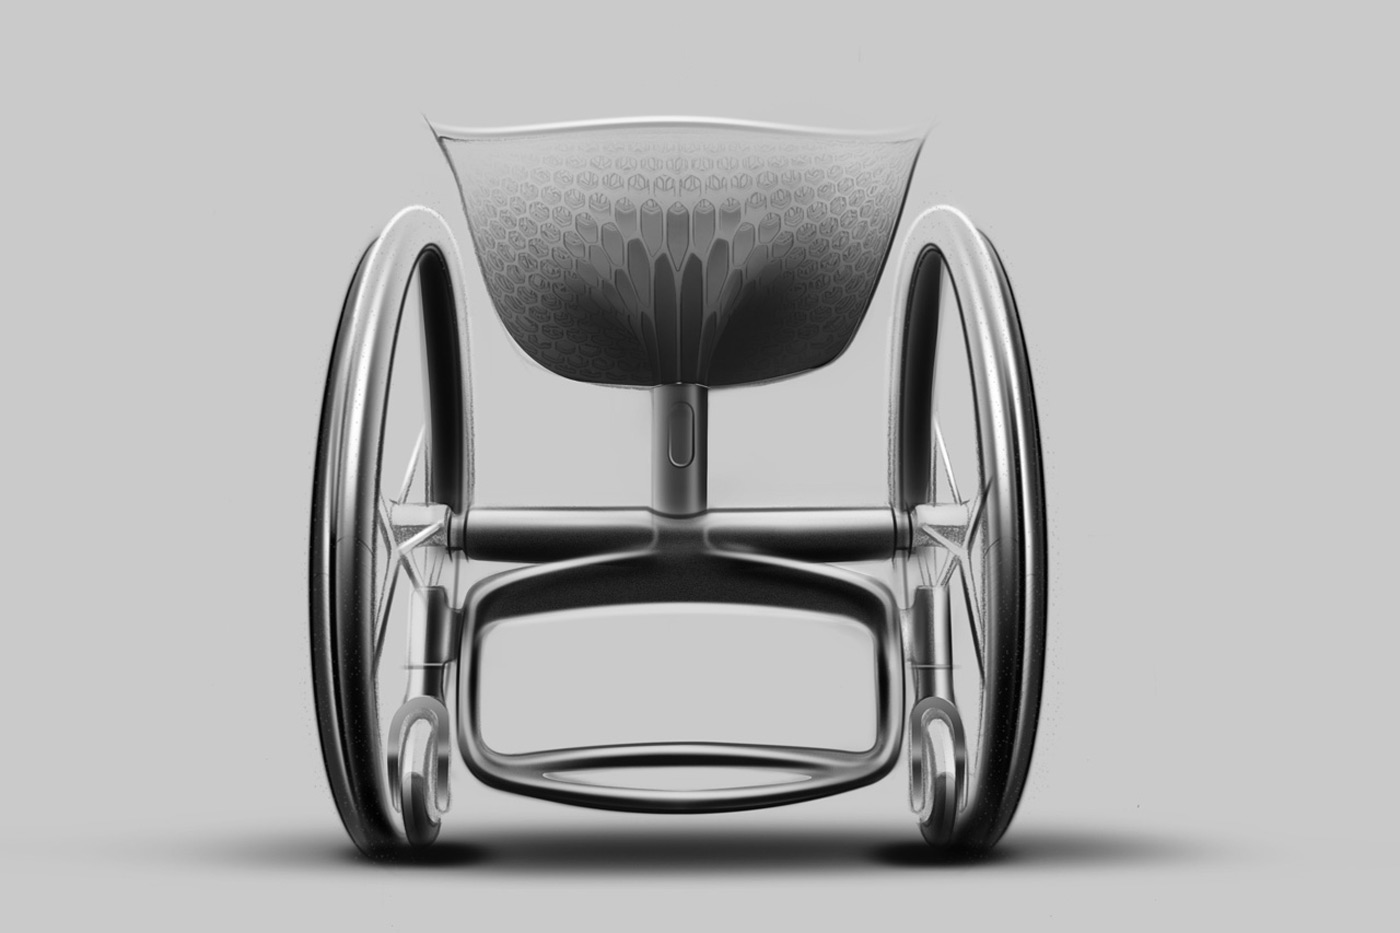 3D-printed wheelchair promises more comfortable rides